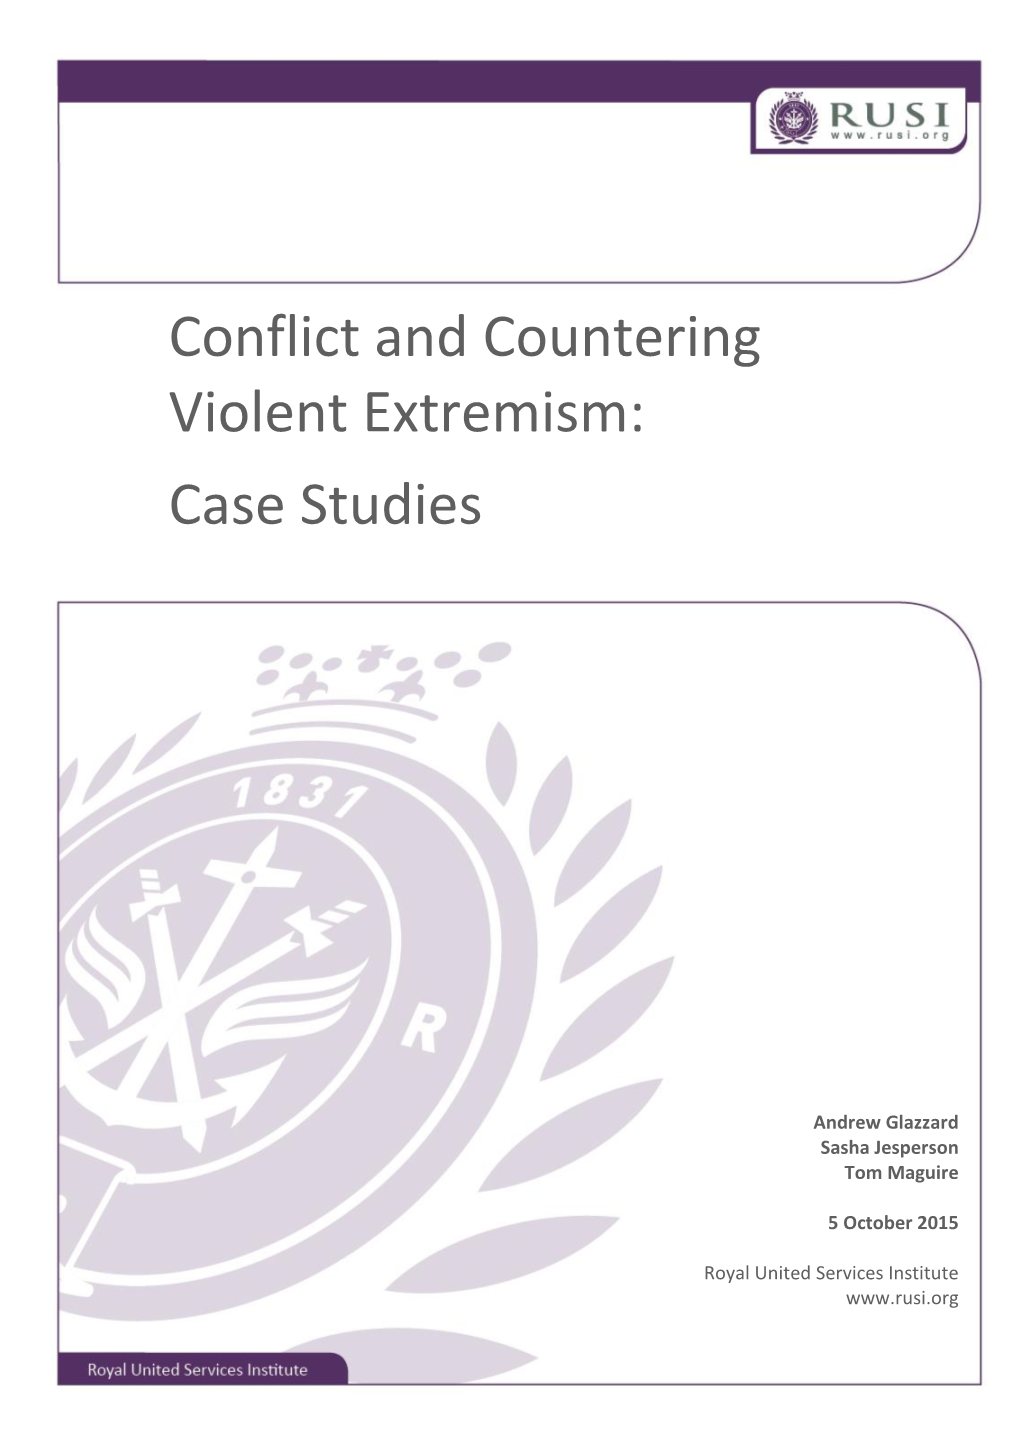 Conflict and Countering Violent Extremism: Case Studies